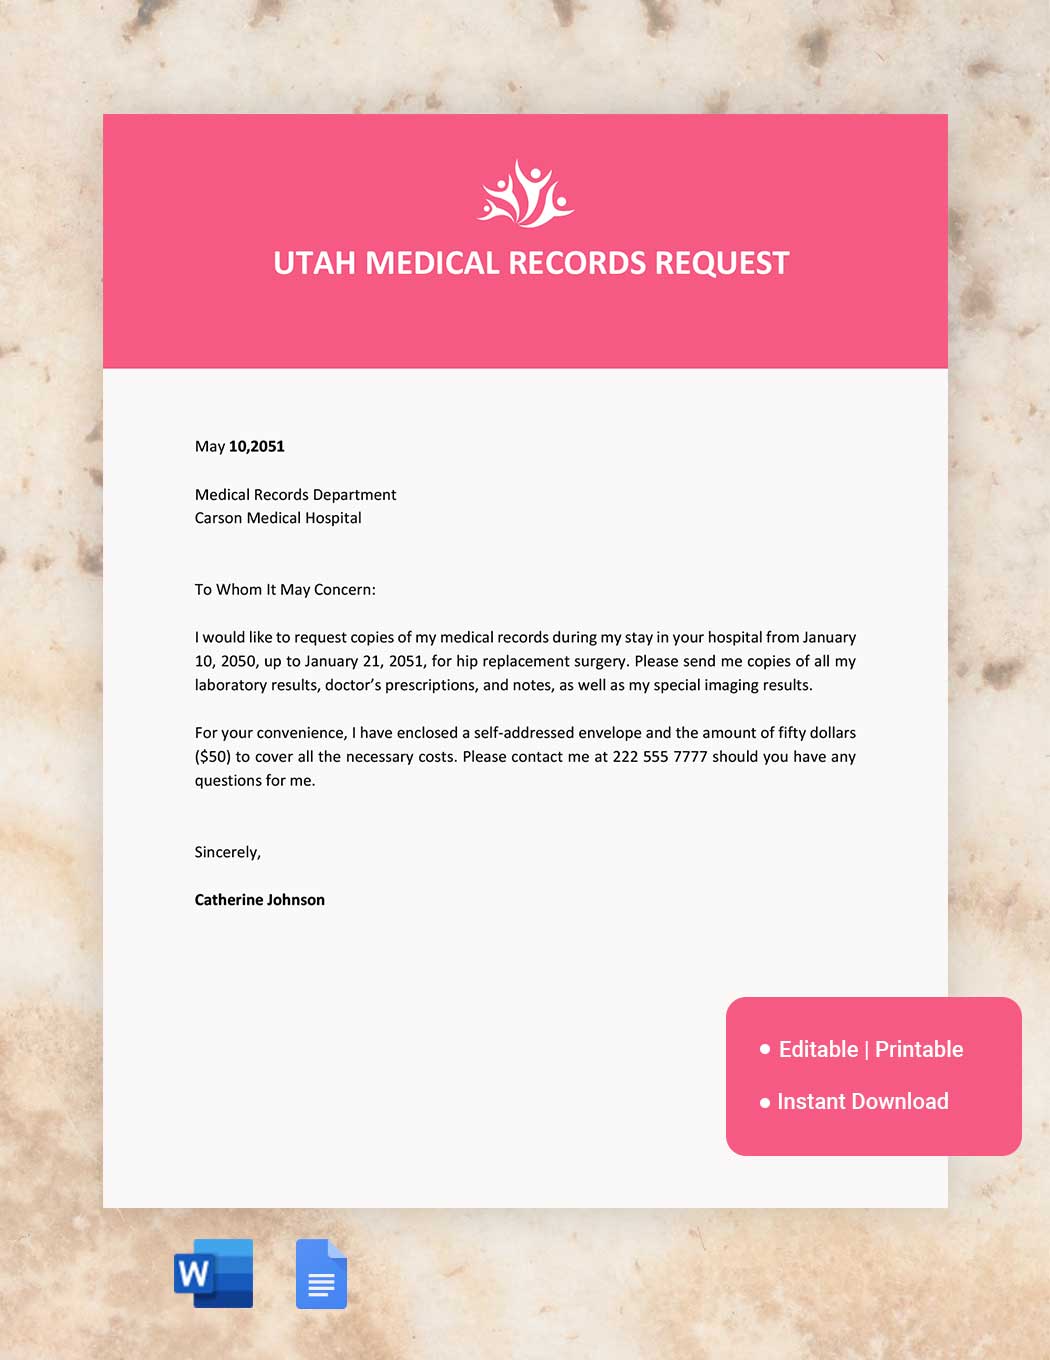 Utah Medical Records Request Template in Word, Google Docs